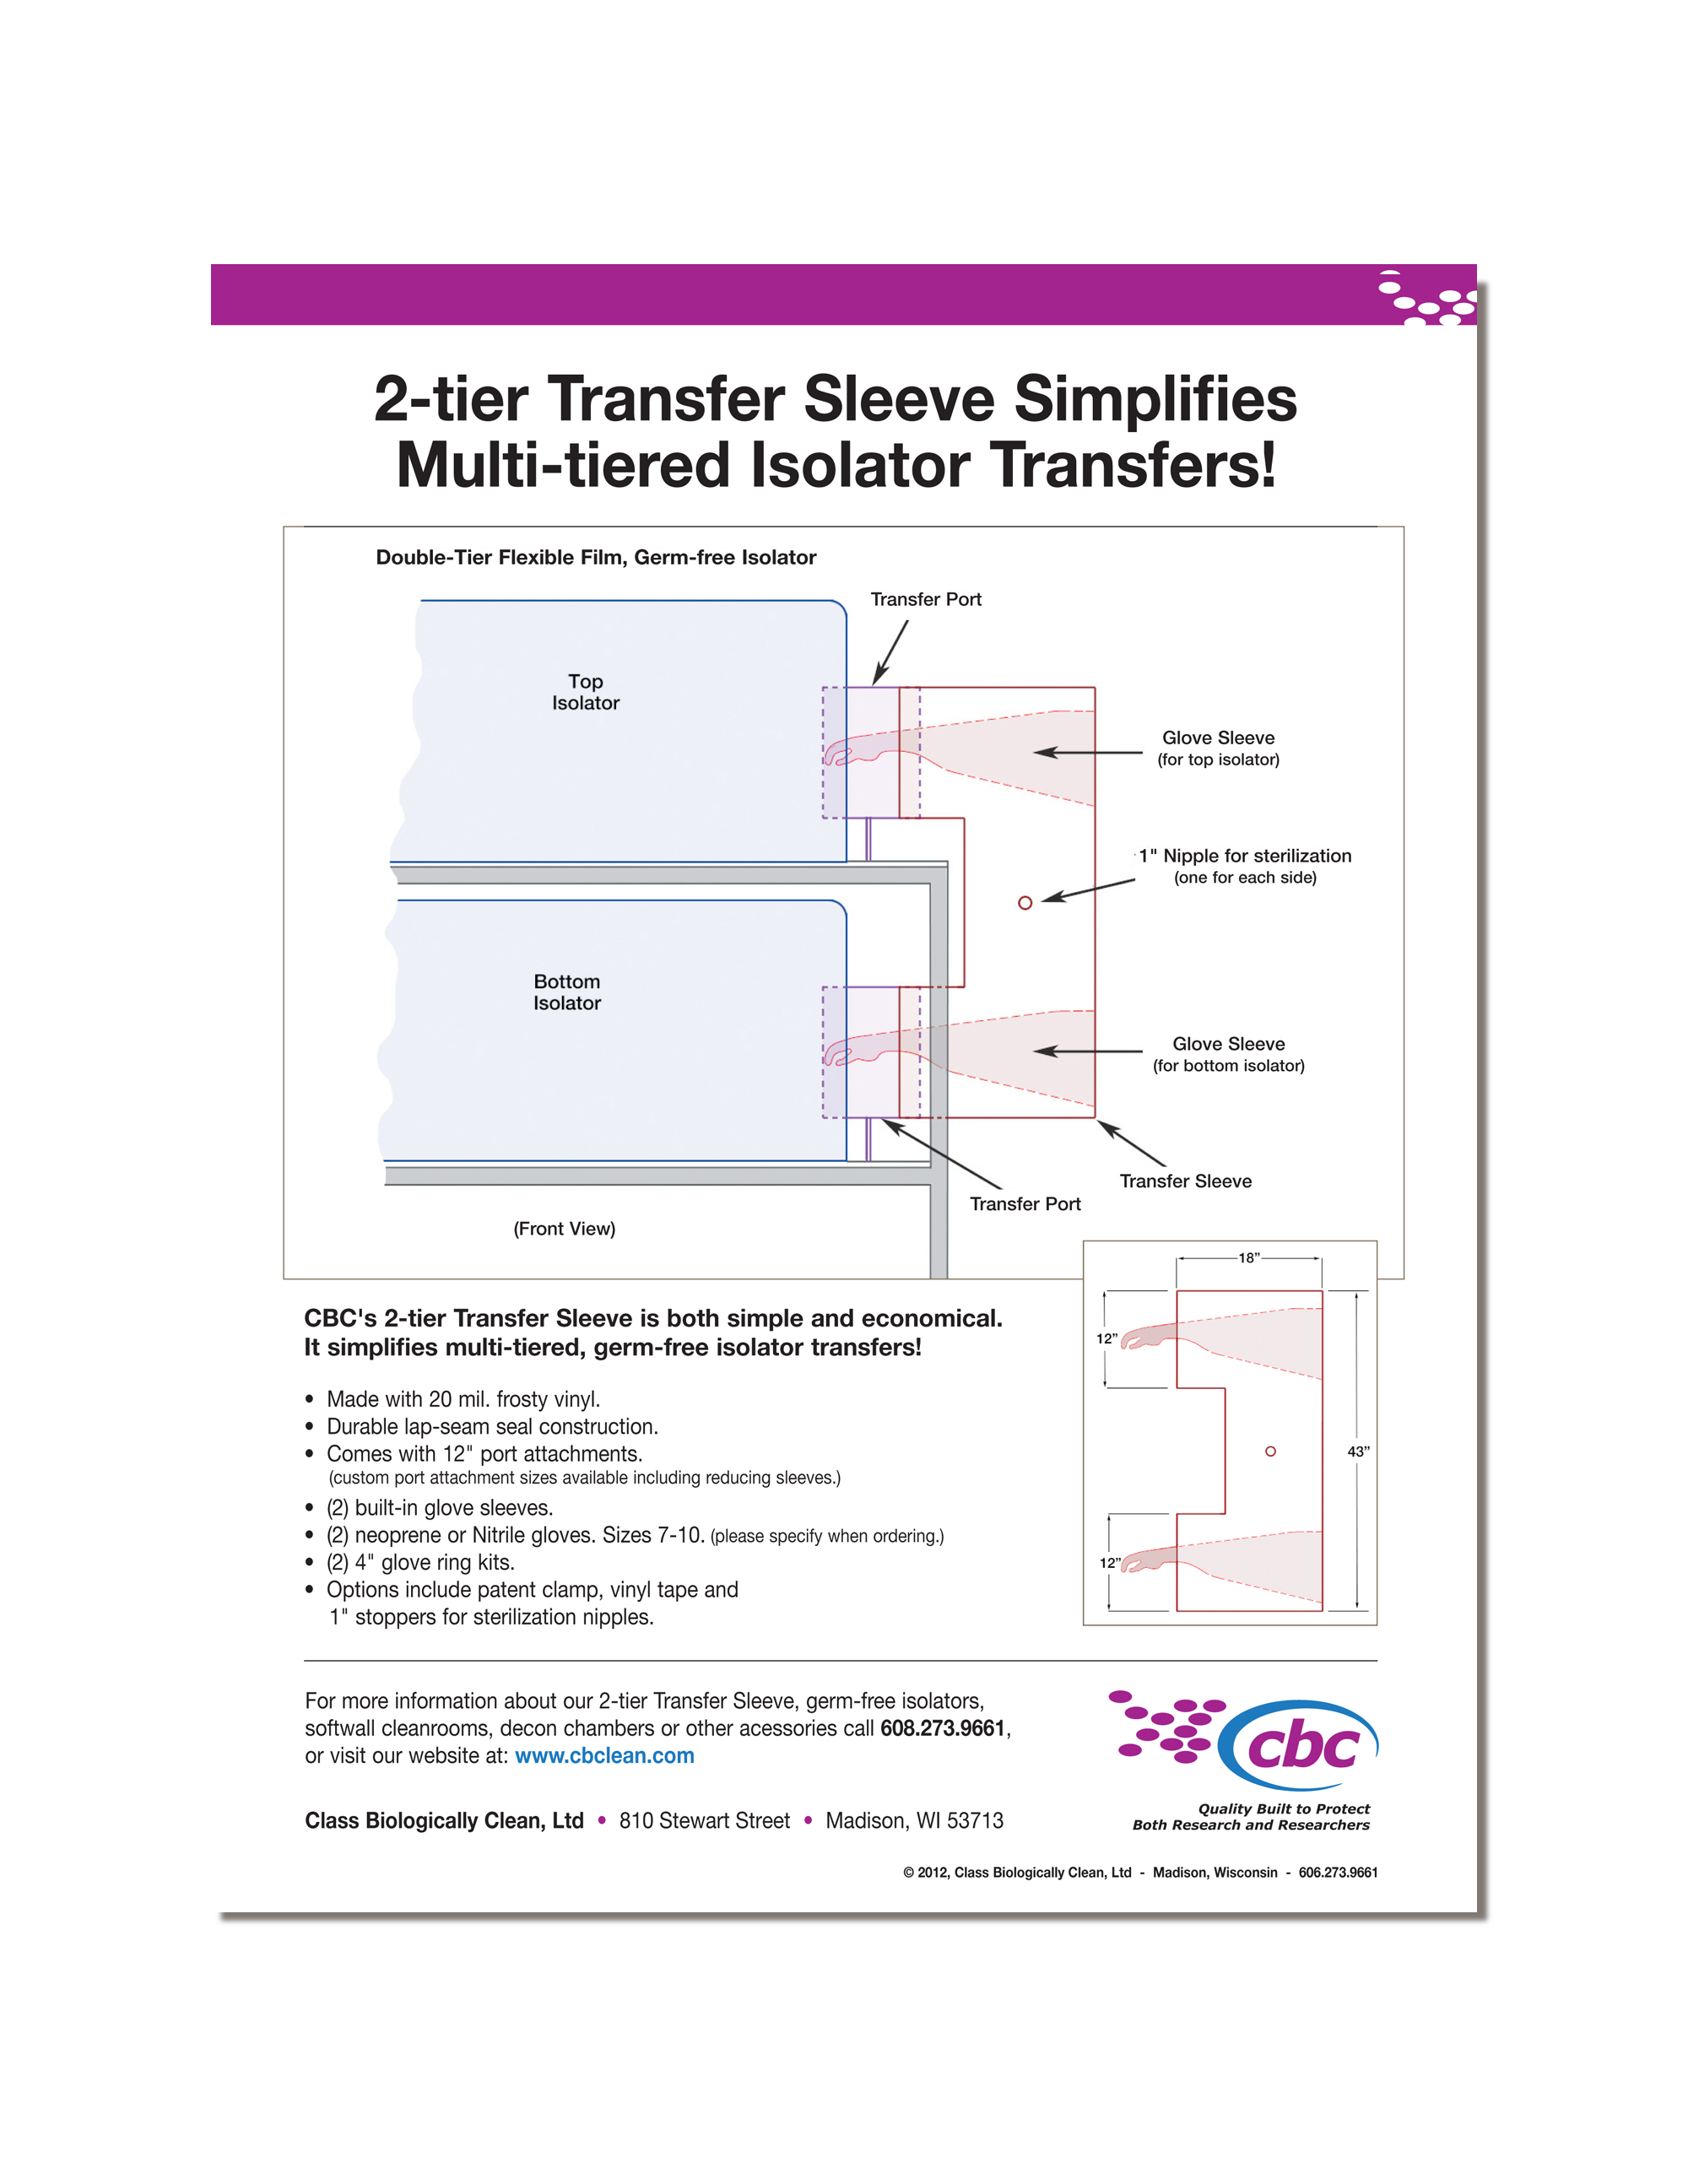 The CBC 2-tier Transfer Sleeve transfer system. Click here to download flyer.